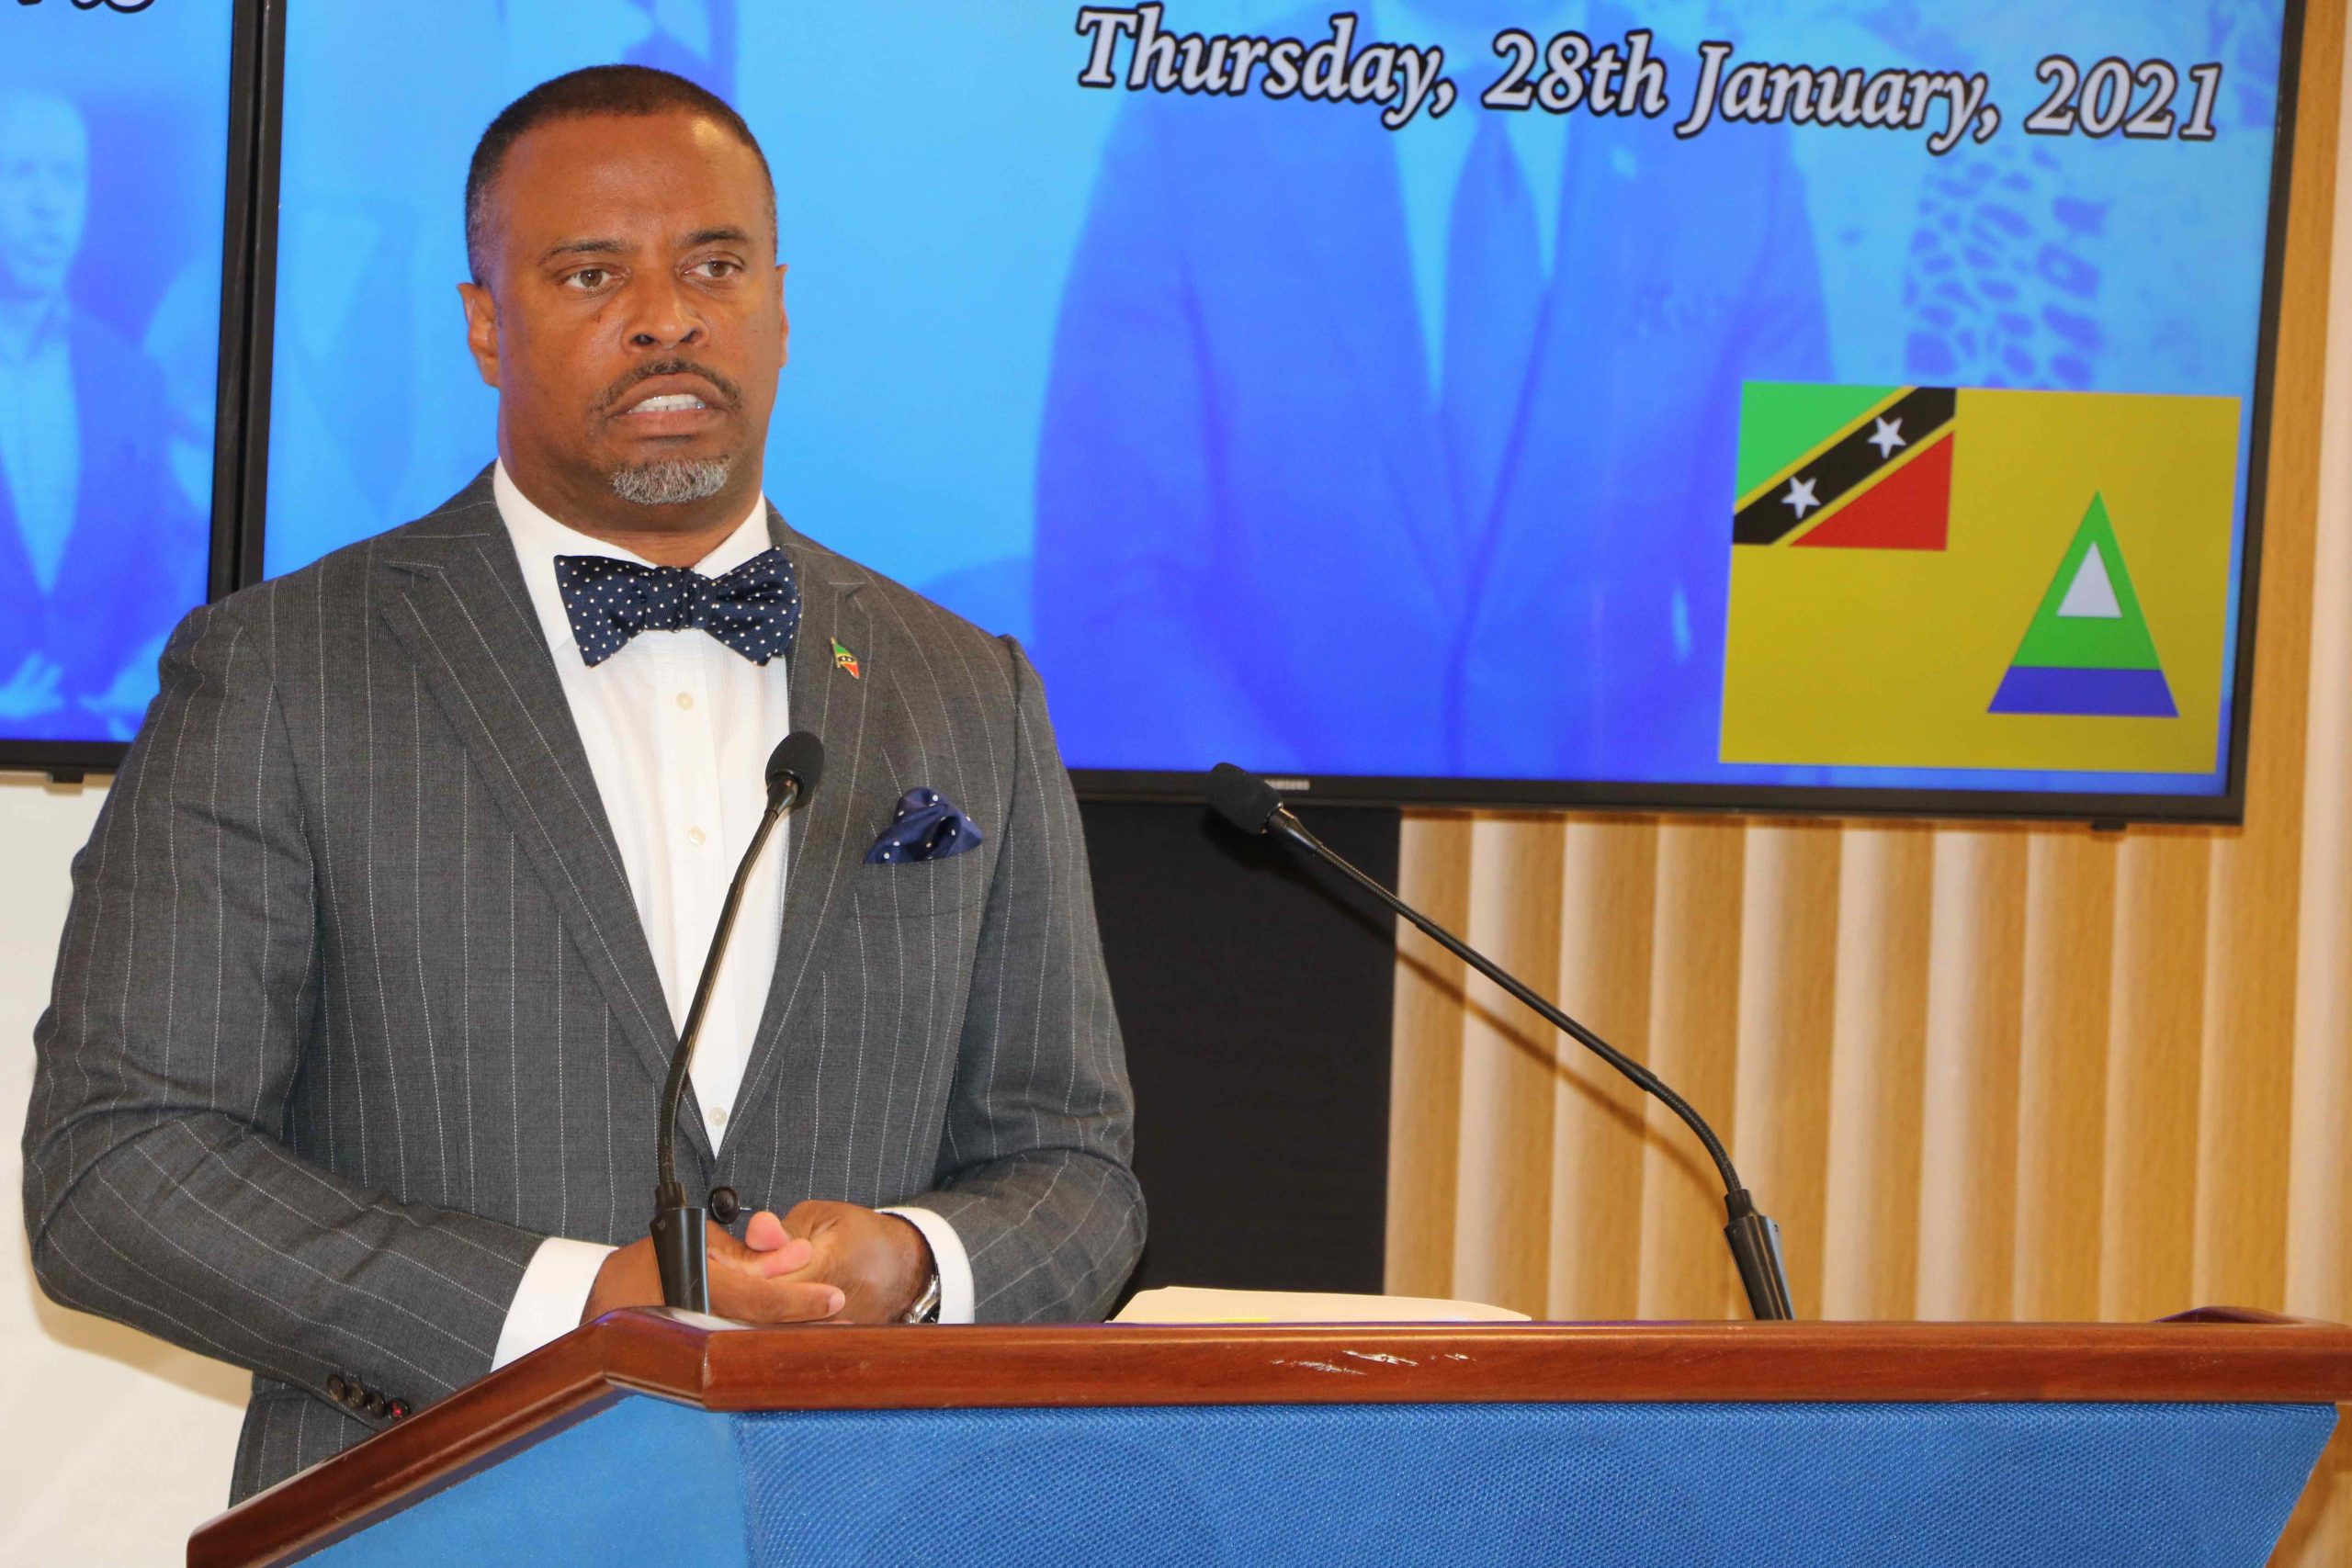 Hon. Mark Brantley, Premier of Nevis at his monthly press conference on January 28, 2021, in Cabinet Room at Pinney’s Estate